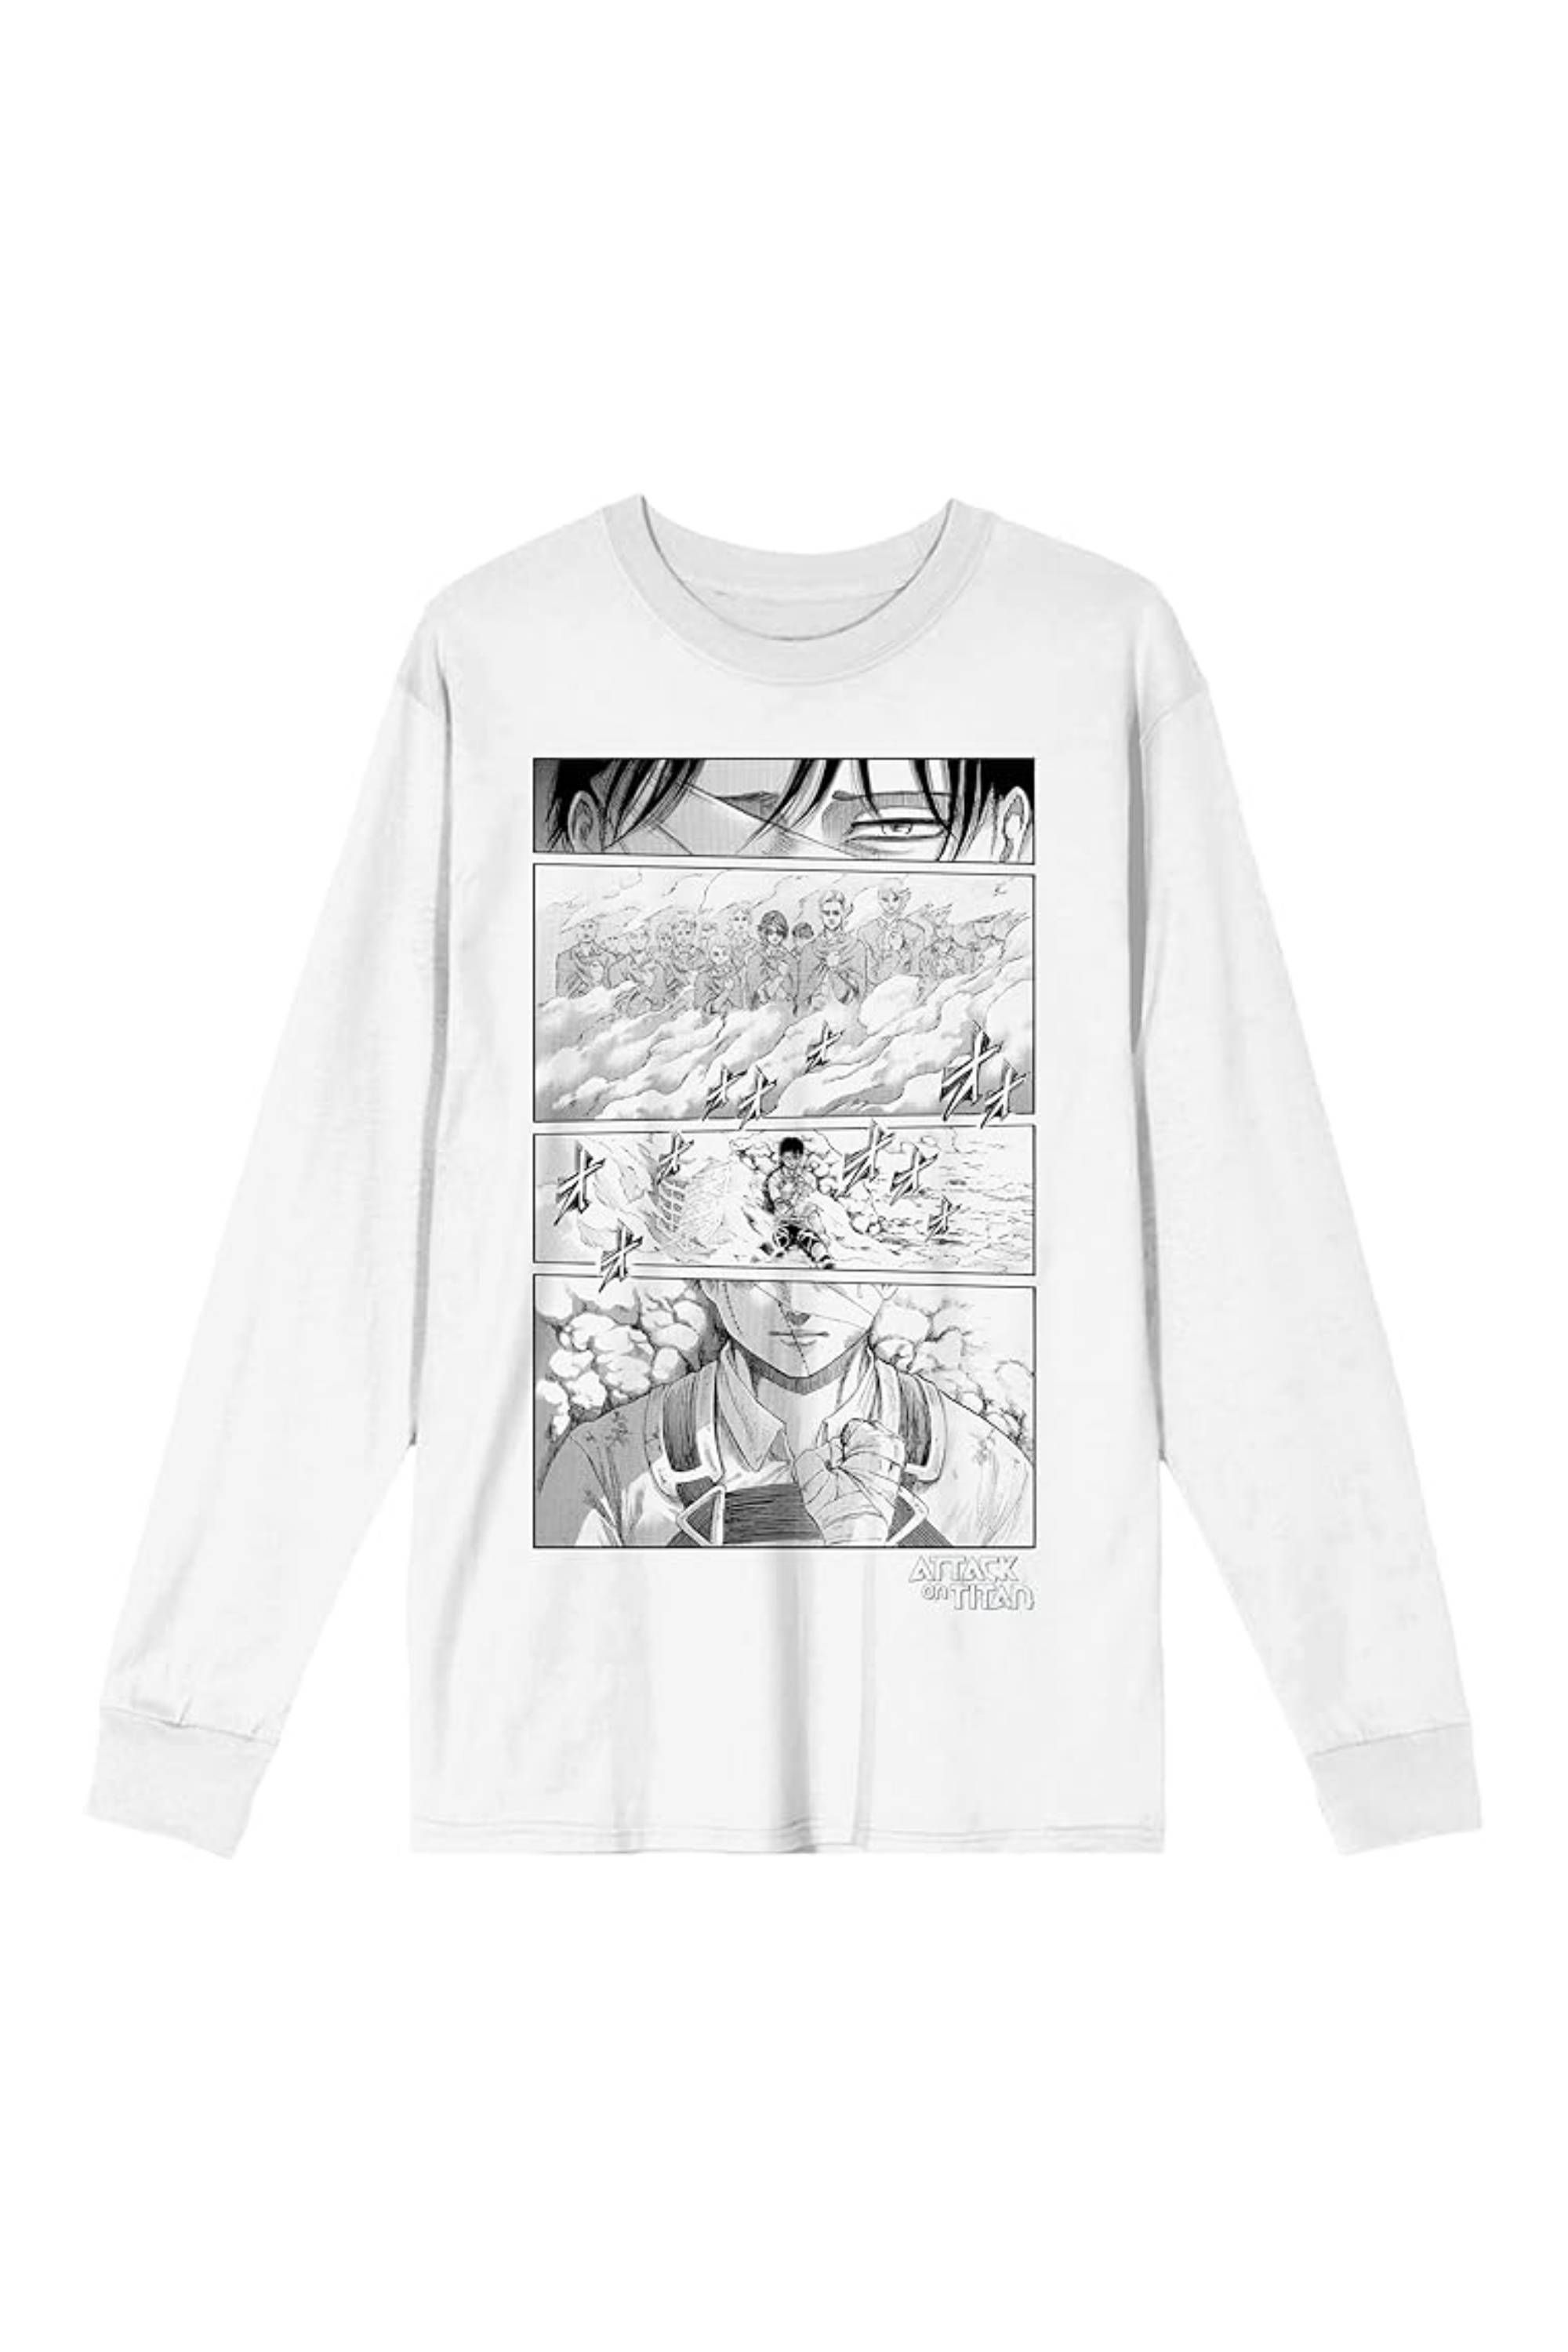 Attack On Titan Levi's Hallucinations Adult White Long Sleeve Tee